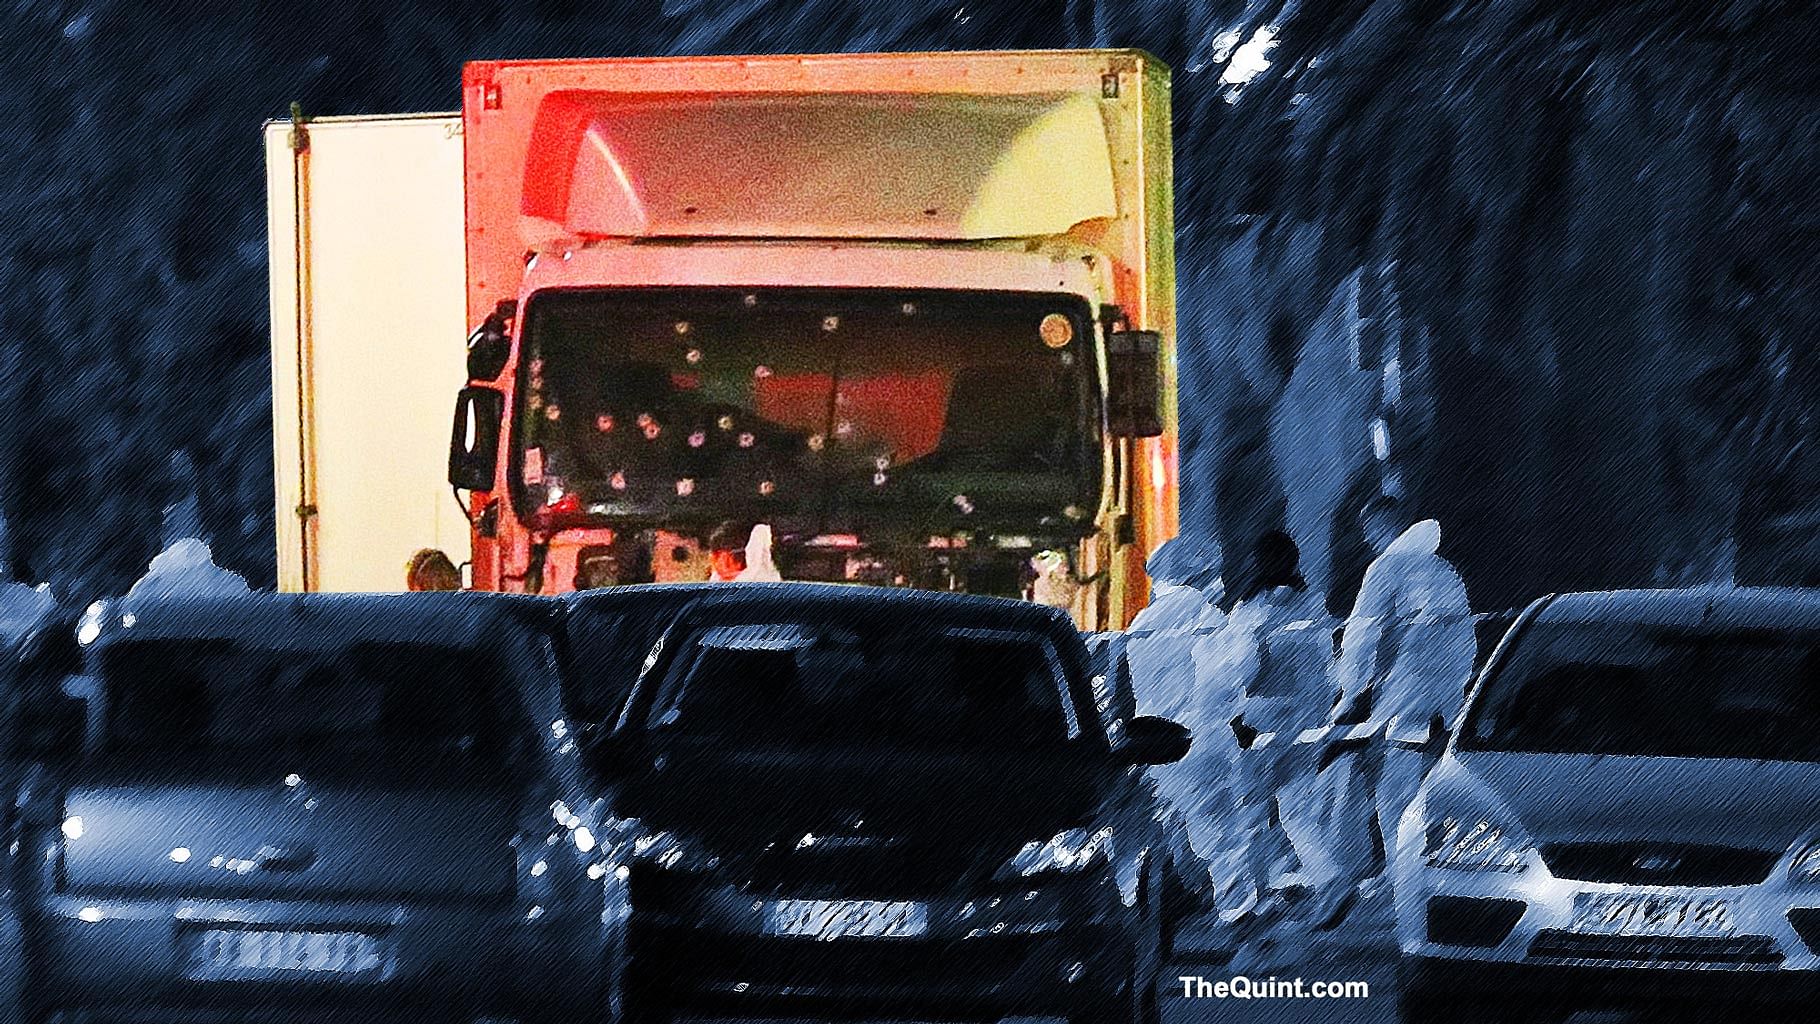 

The truck which slammed into revelers is seen near the site of an attack in the French resort city of Nice. (Photo: <b>The Quint</b>)